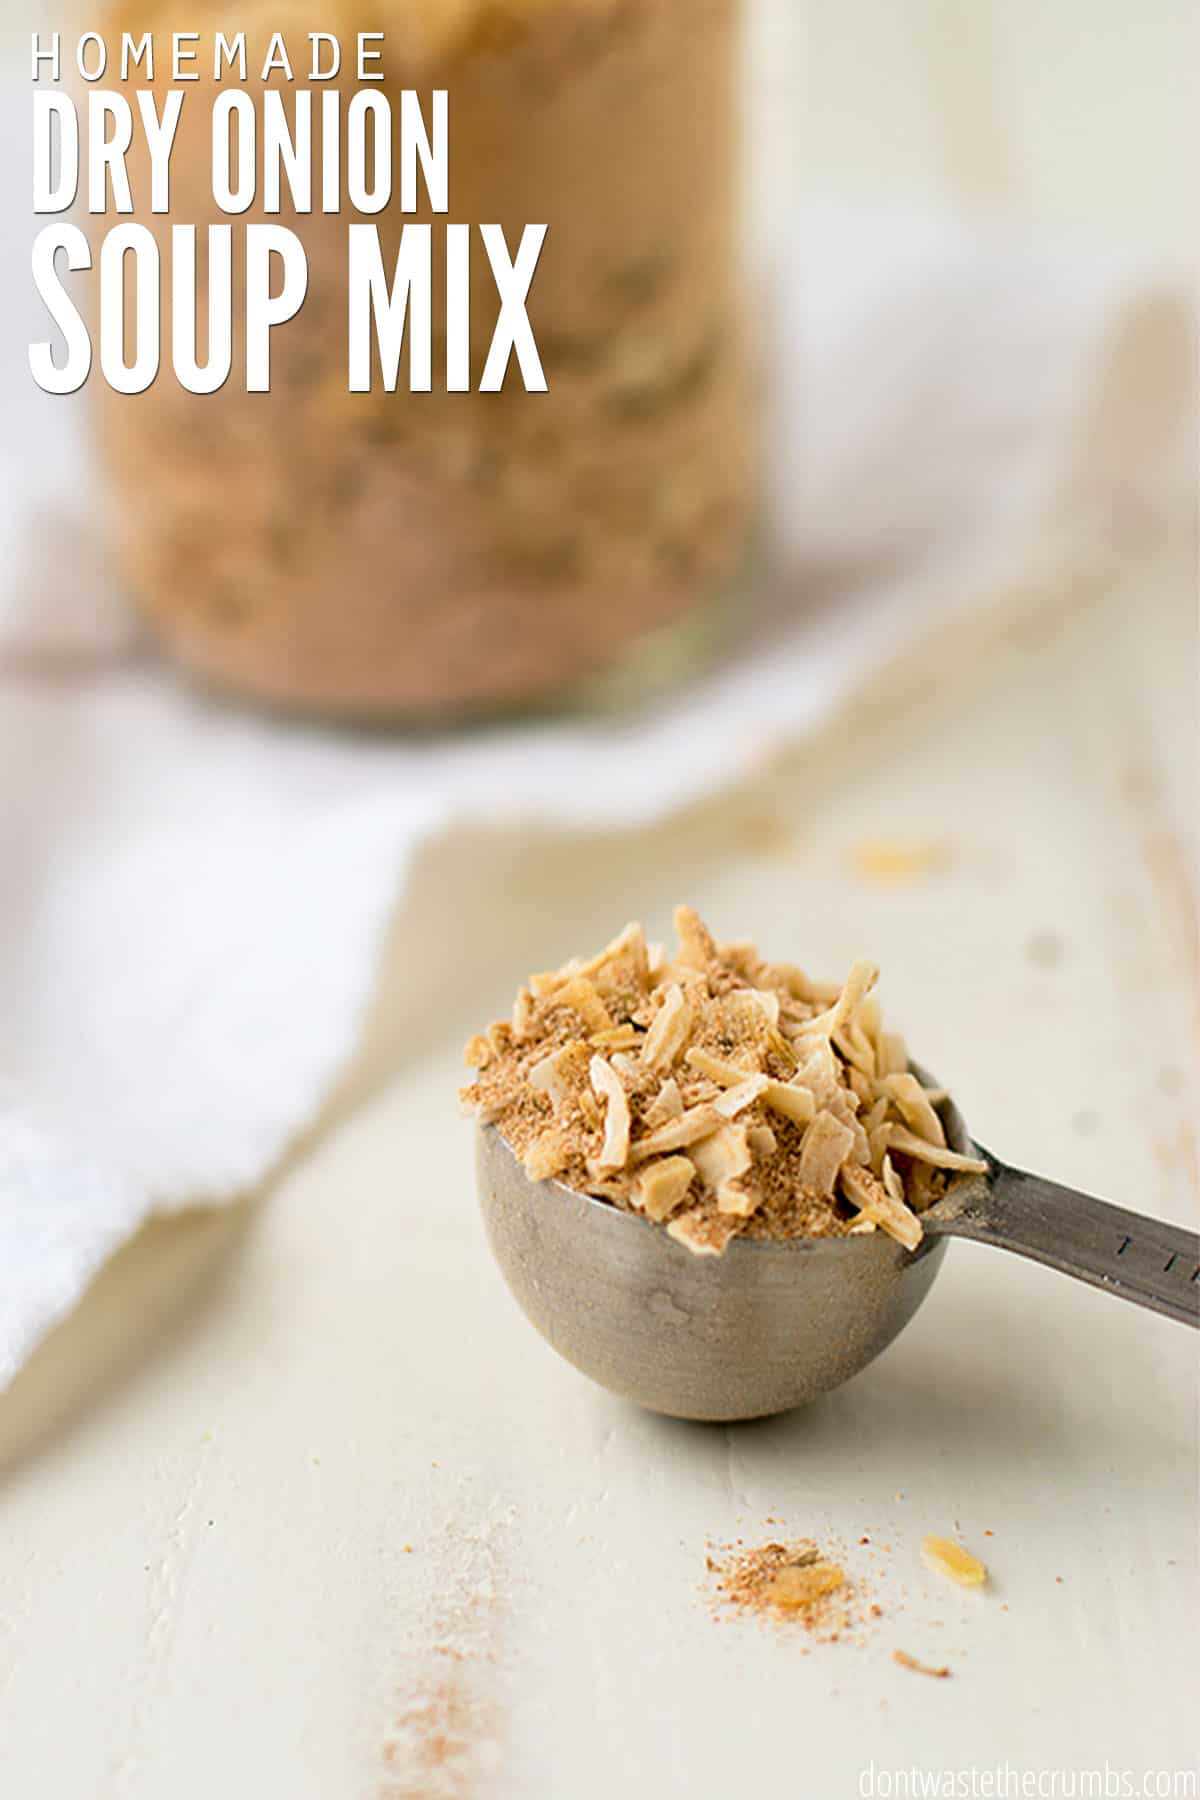 A Tbsp scoop of homemade dry onion soup mix. The text overlay reads "Homemade Dry Onion Soup Mix."